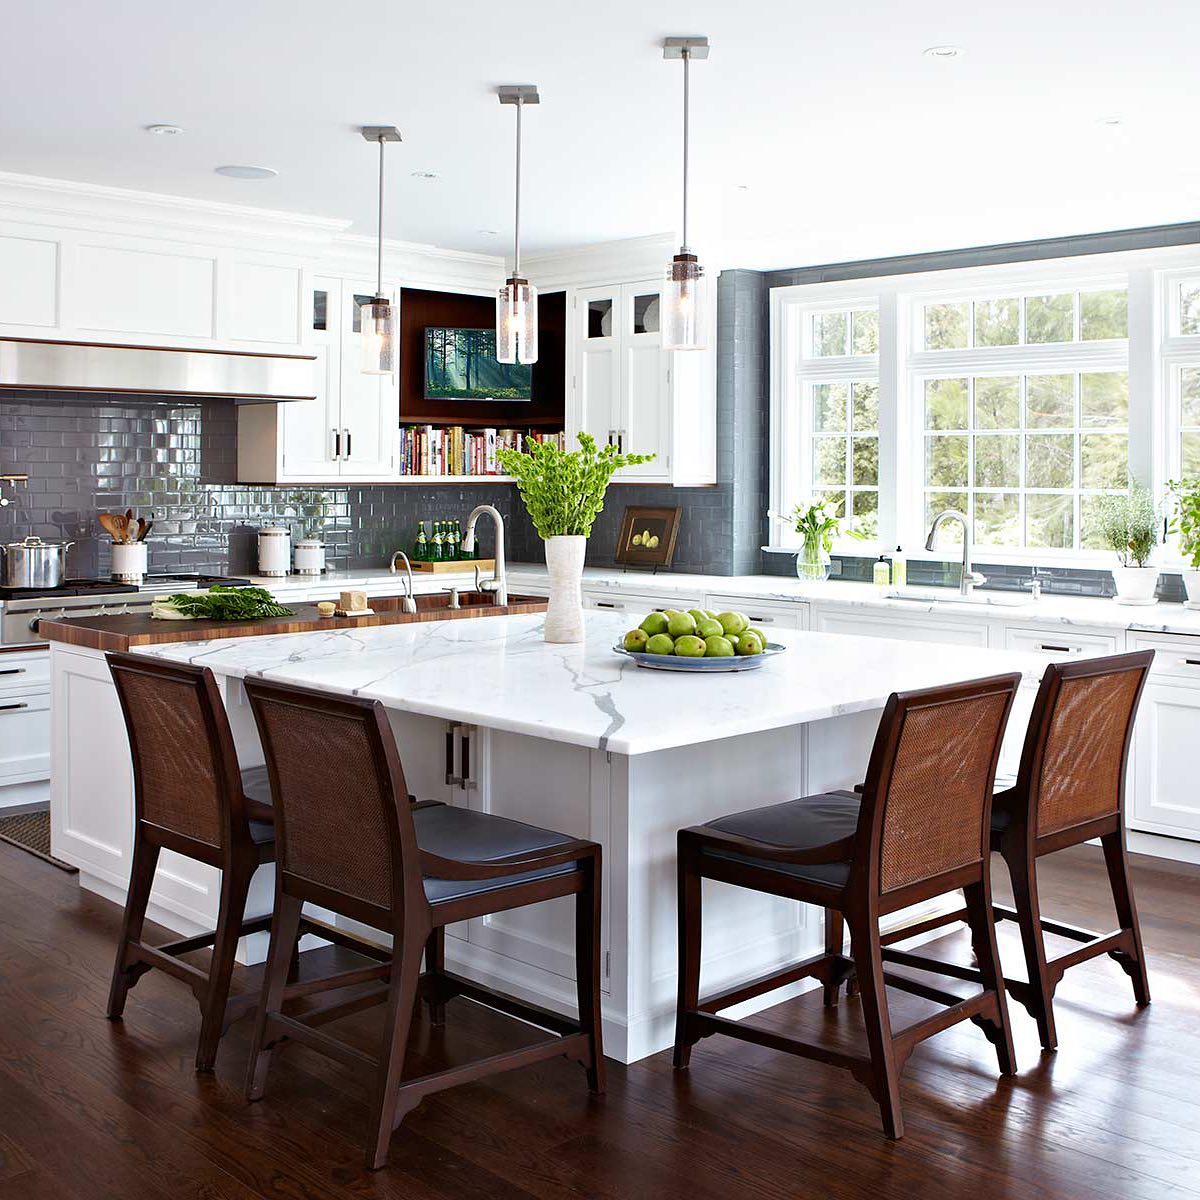 10 Key Features of a Stunning Transitional Kitchen